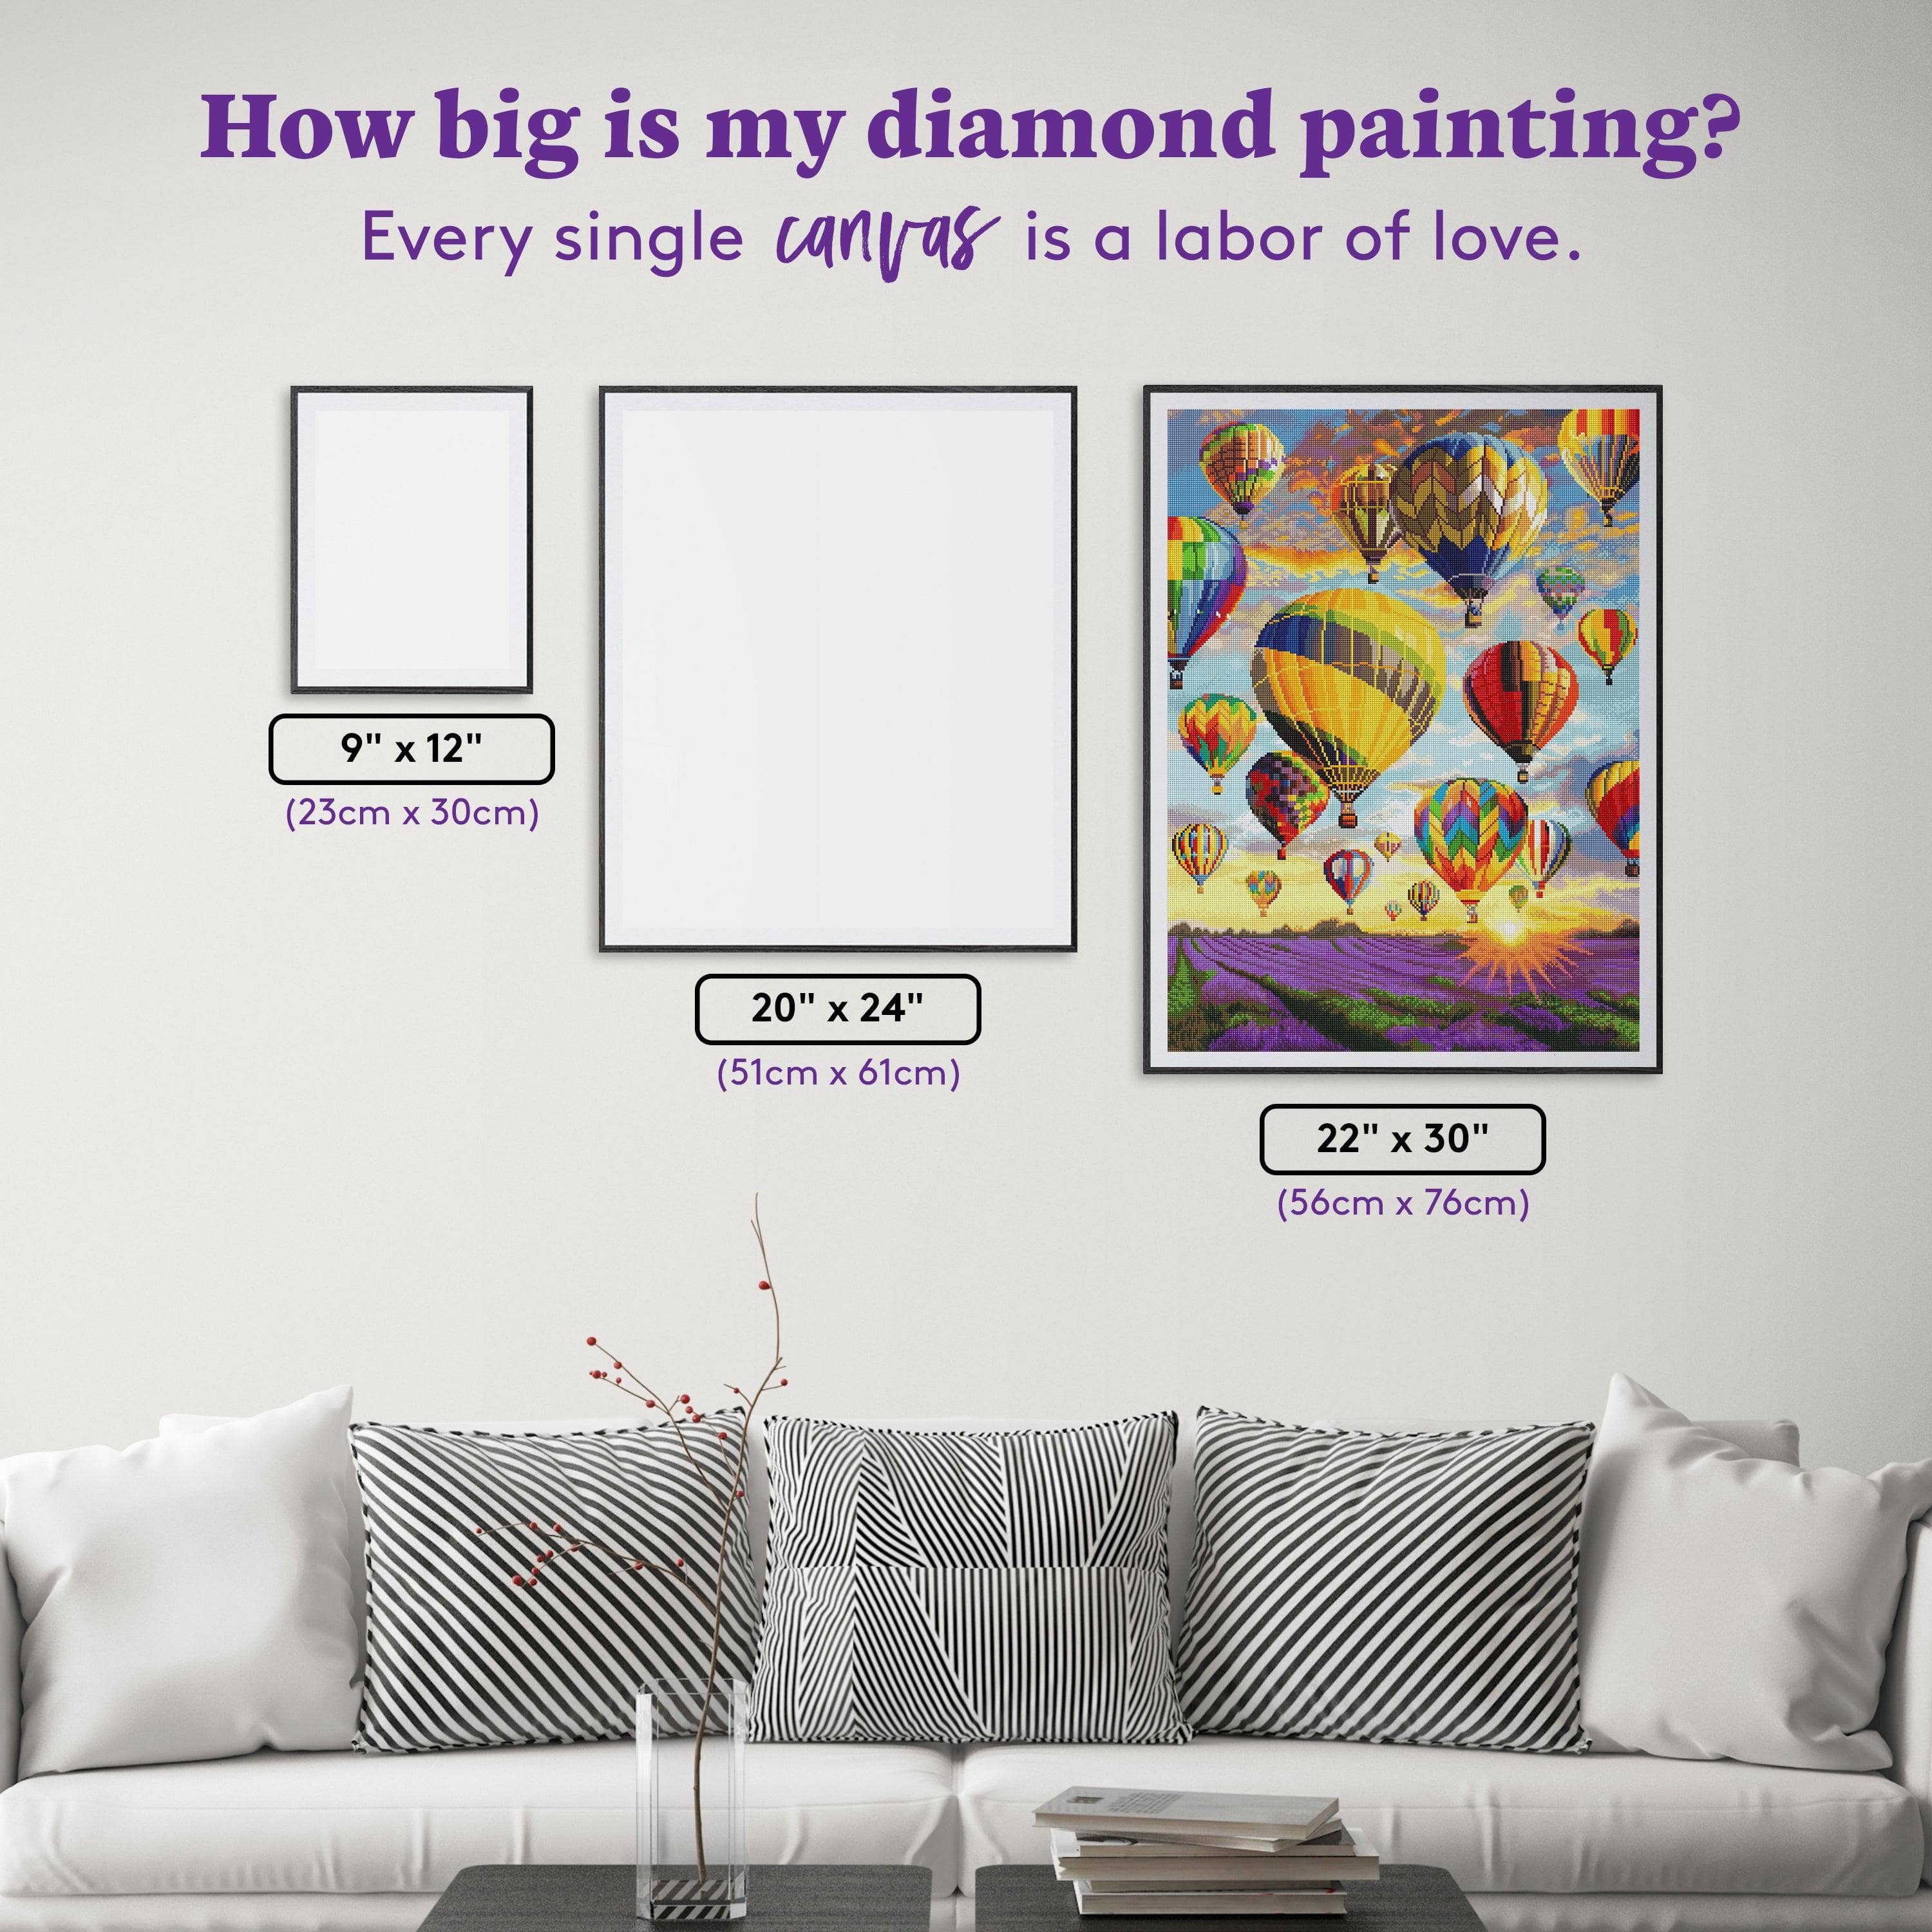 Best diamond painting kits, accessories and supplies - Gathered